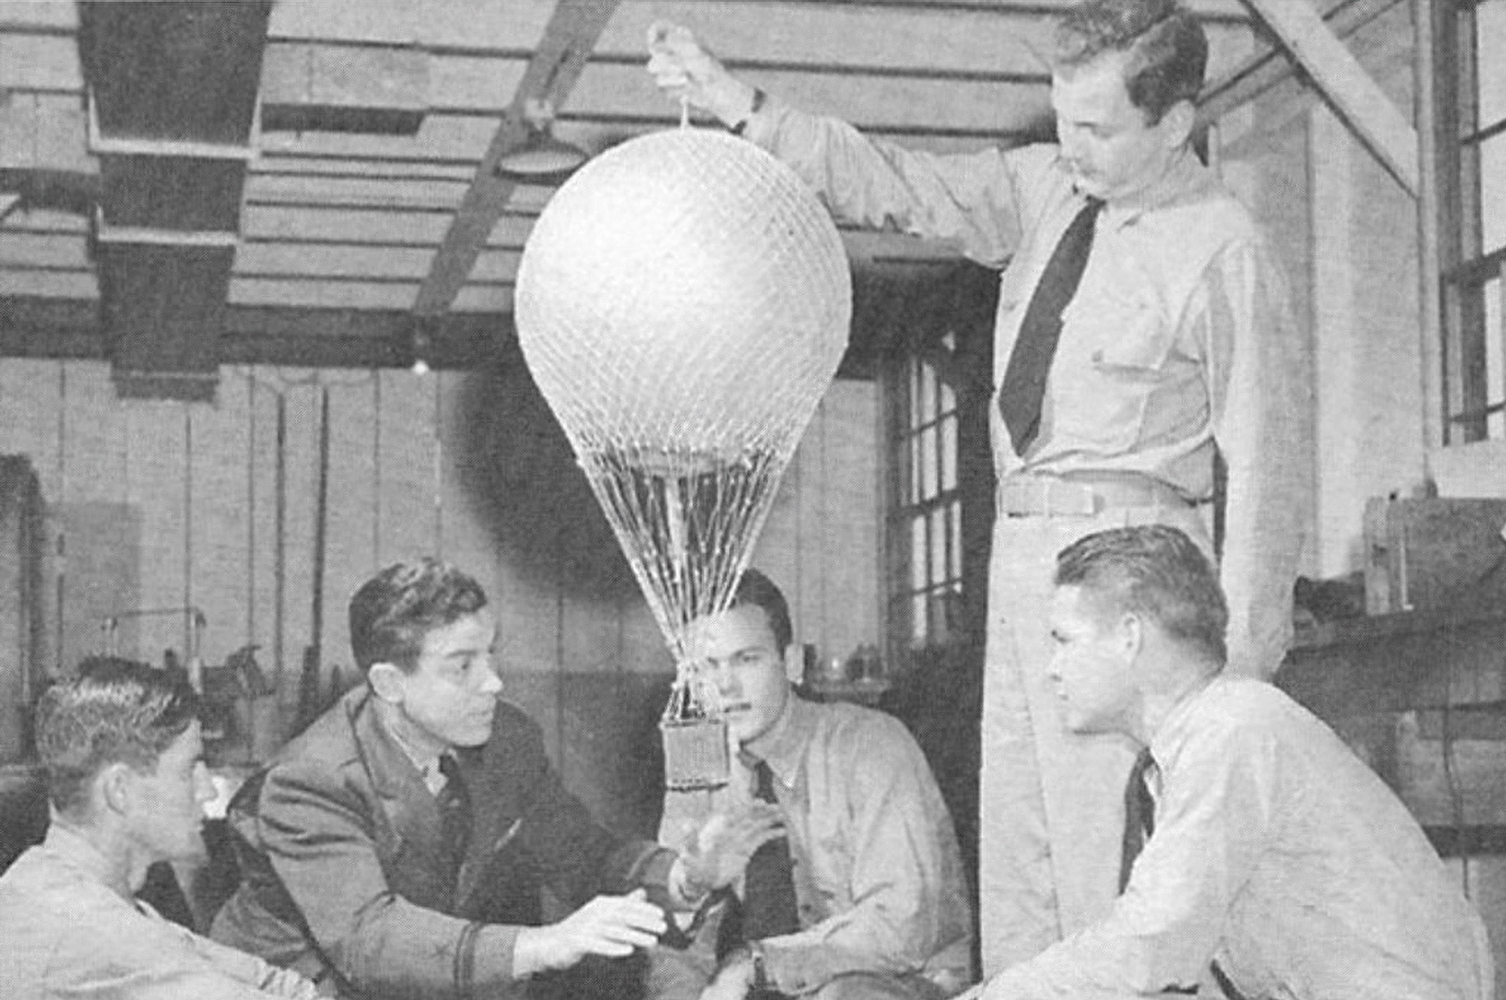 A Navy cadet holds the top of a training balloon model with his outstretched arm. The instructor, kneeling beside the model, teaches his 4 students